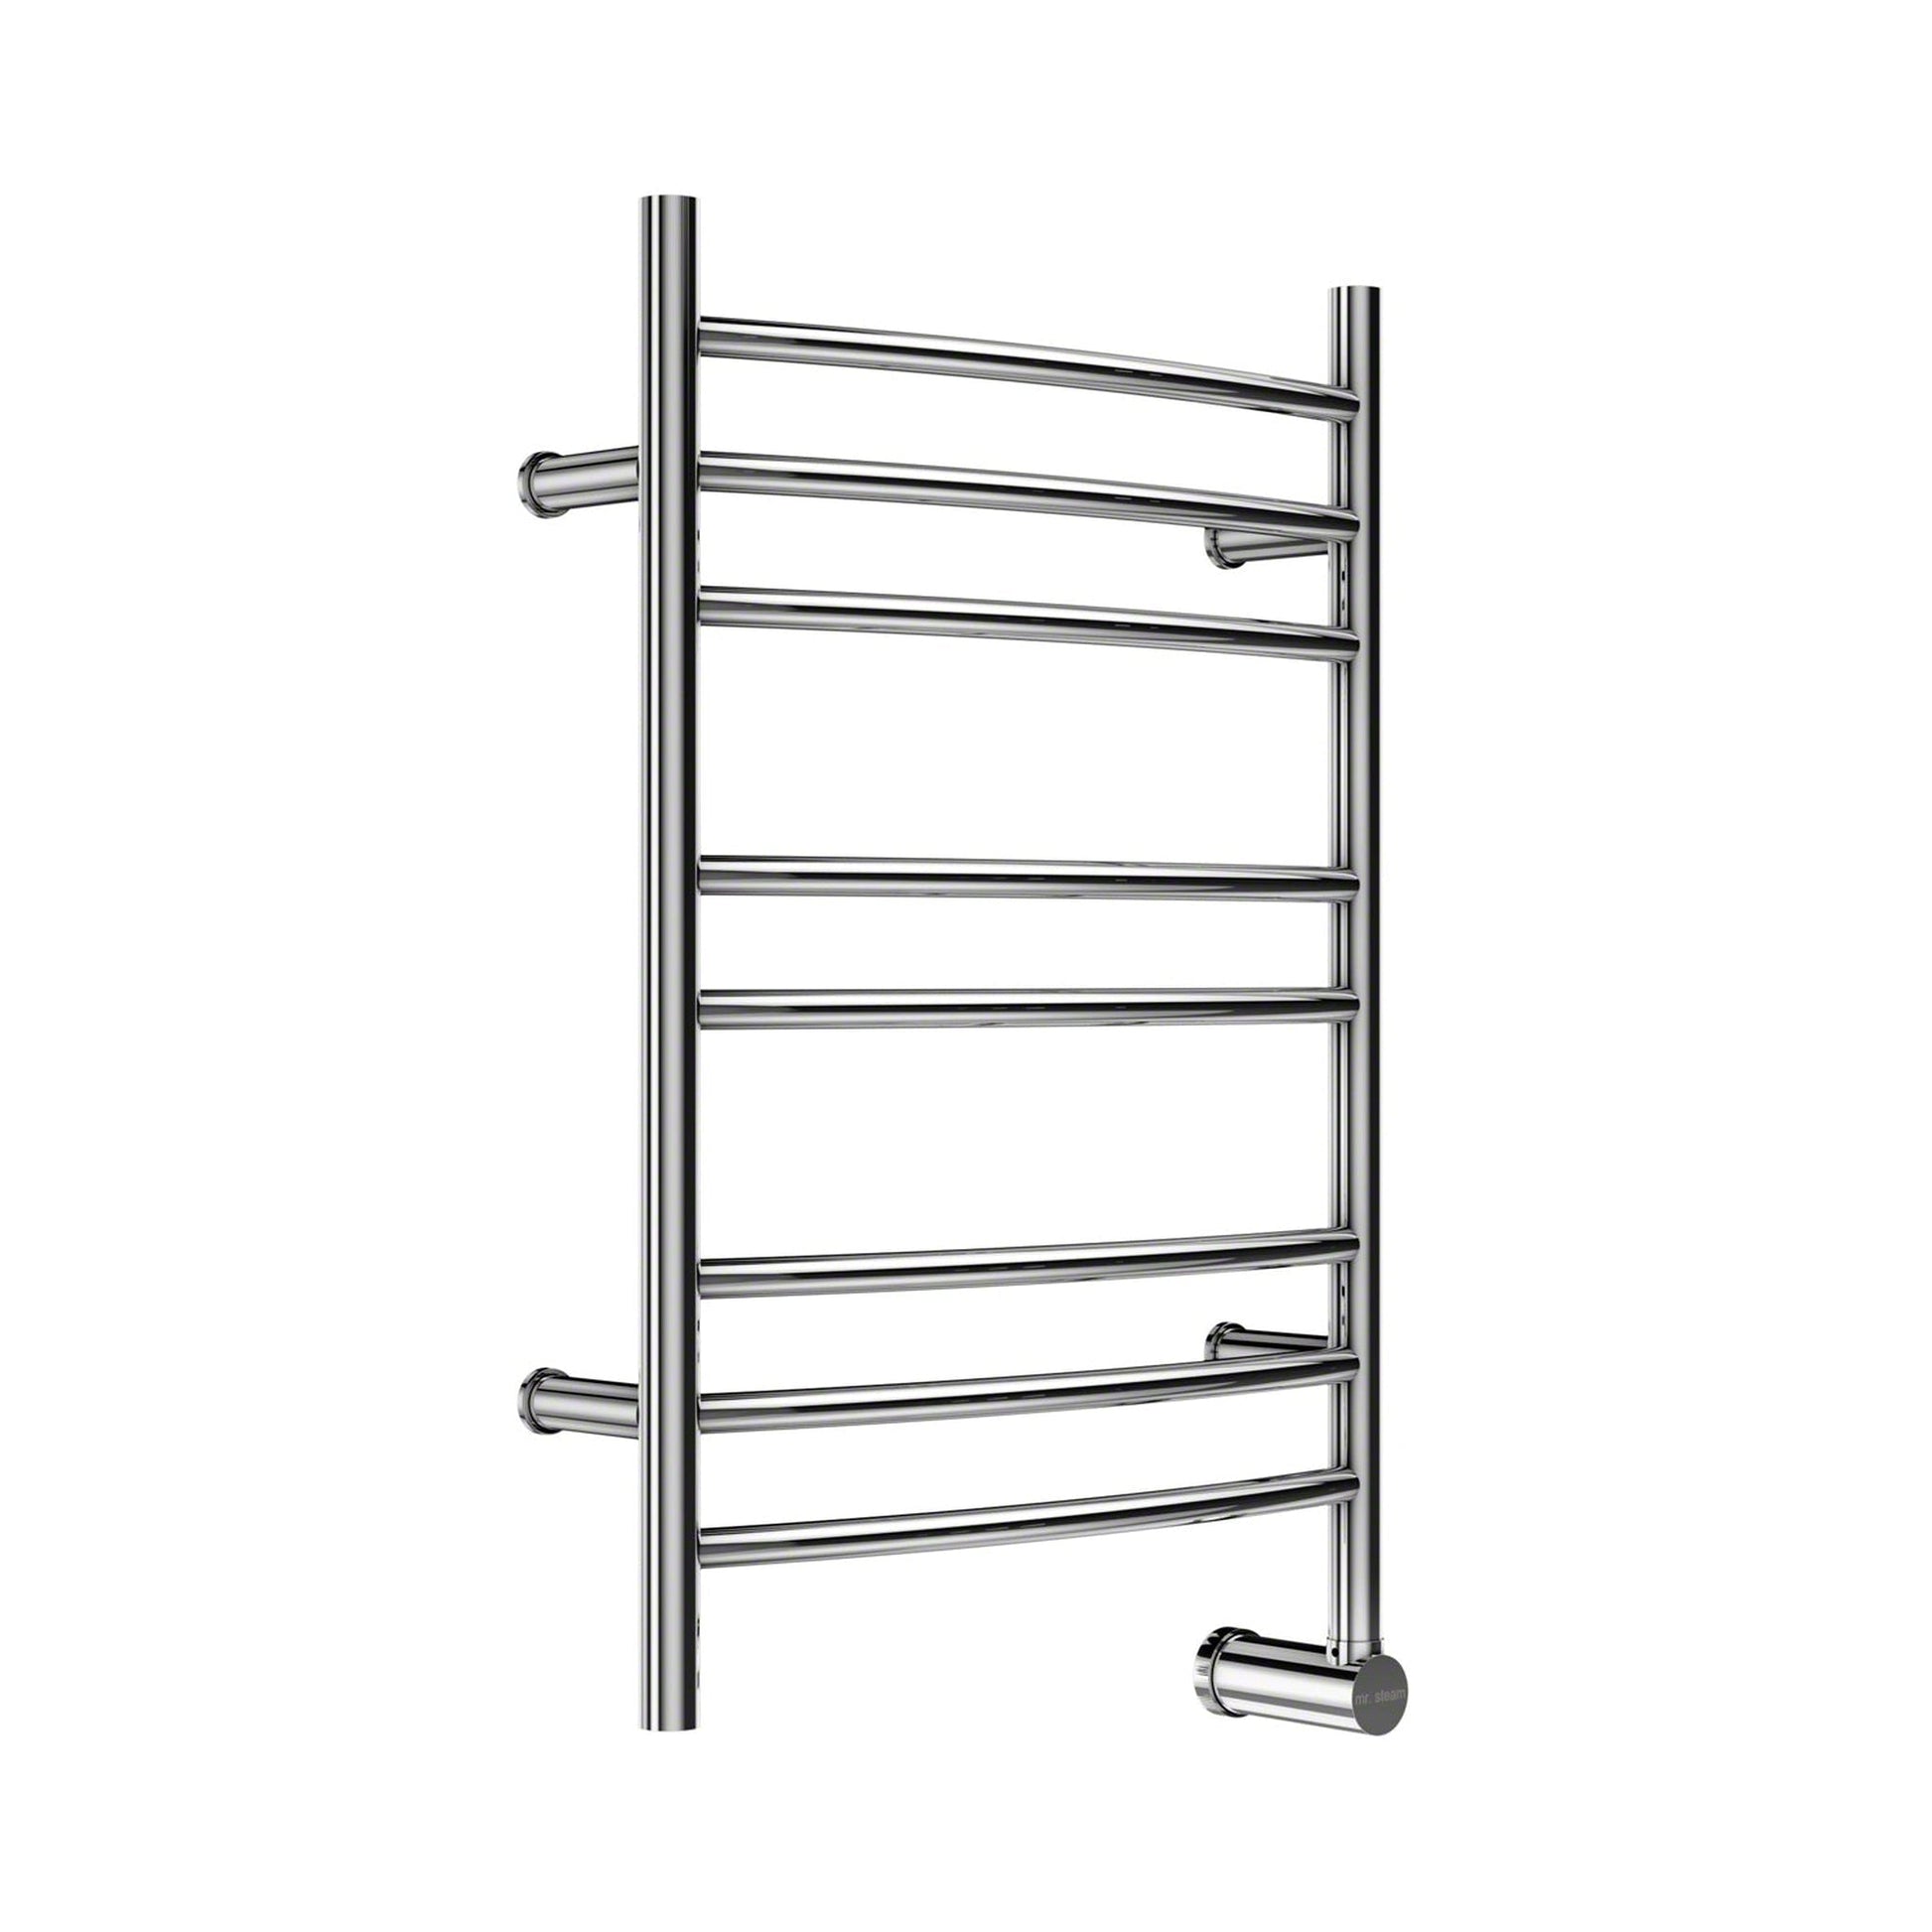 MrSteam Metro Collection 31" x 20" x 5" Stainless Steel Polished in 8-Bar Wall-Mounted Electric Towel Warmer with Digital Timer